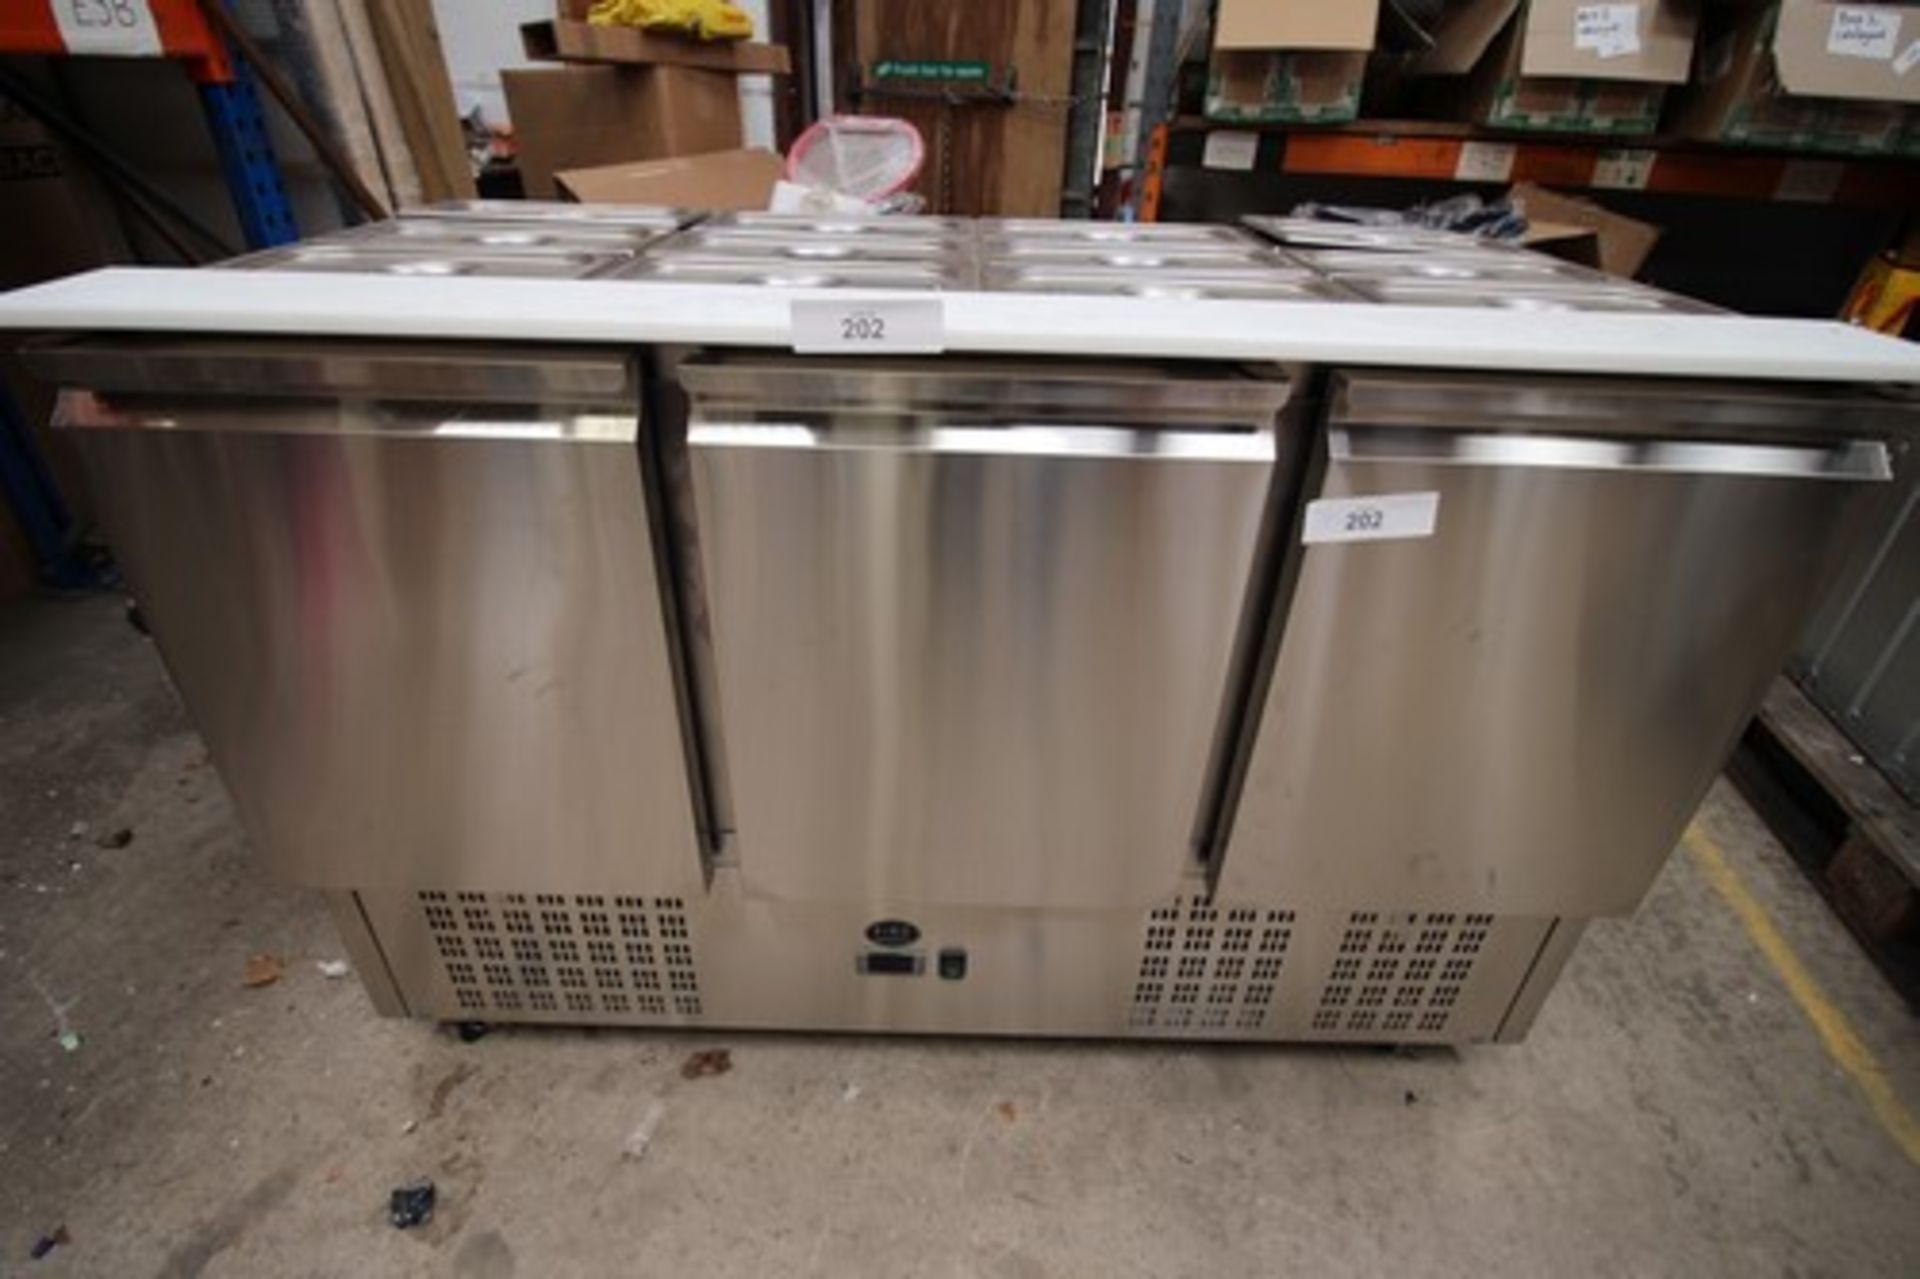 1 x King stainless steel pizza salad prep counter, 240V. We have powered it on and it chills. We